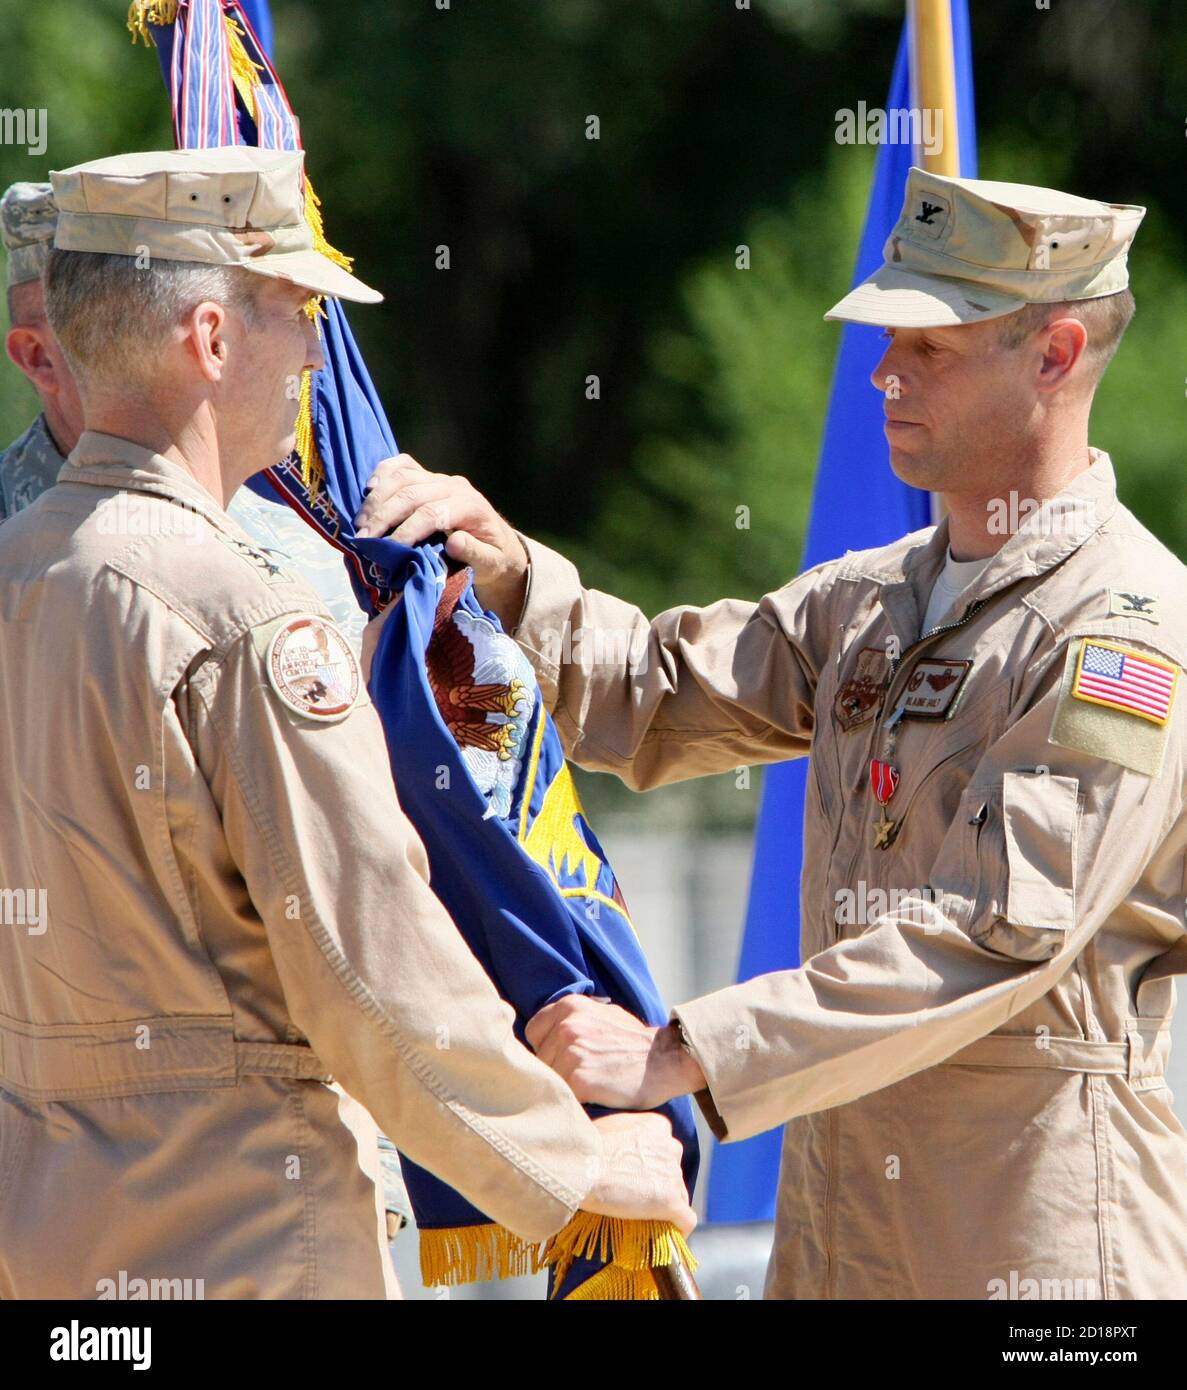 Mike Hostage (L), Commander, U.S. Air Force Central Command, Southwest Asia, and Colonel Blaine Holt take part in the handover of command ceremony over the unit at the U.S. transit center at Manas airport near Bishkek, June 15, 2010. Colonel Blaine Holt relinquished command of the 376th Air Expeditionary Wing to Colonel Dwight C. Sones.  REUTERS/Vladimir Pirogov  (KYRGYZSTAN - Tags: MILITARY POLITICS) Stock Photo